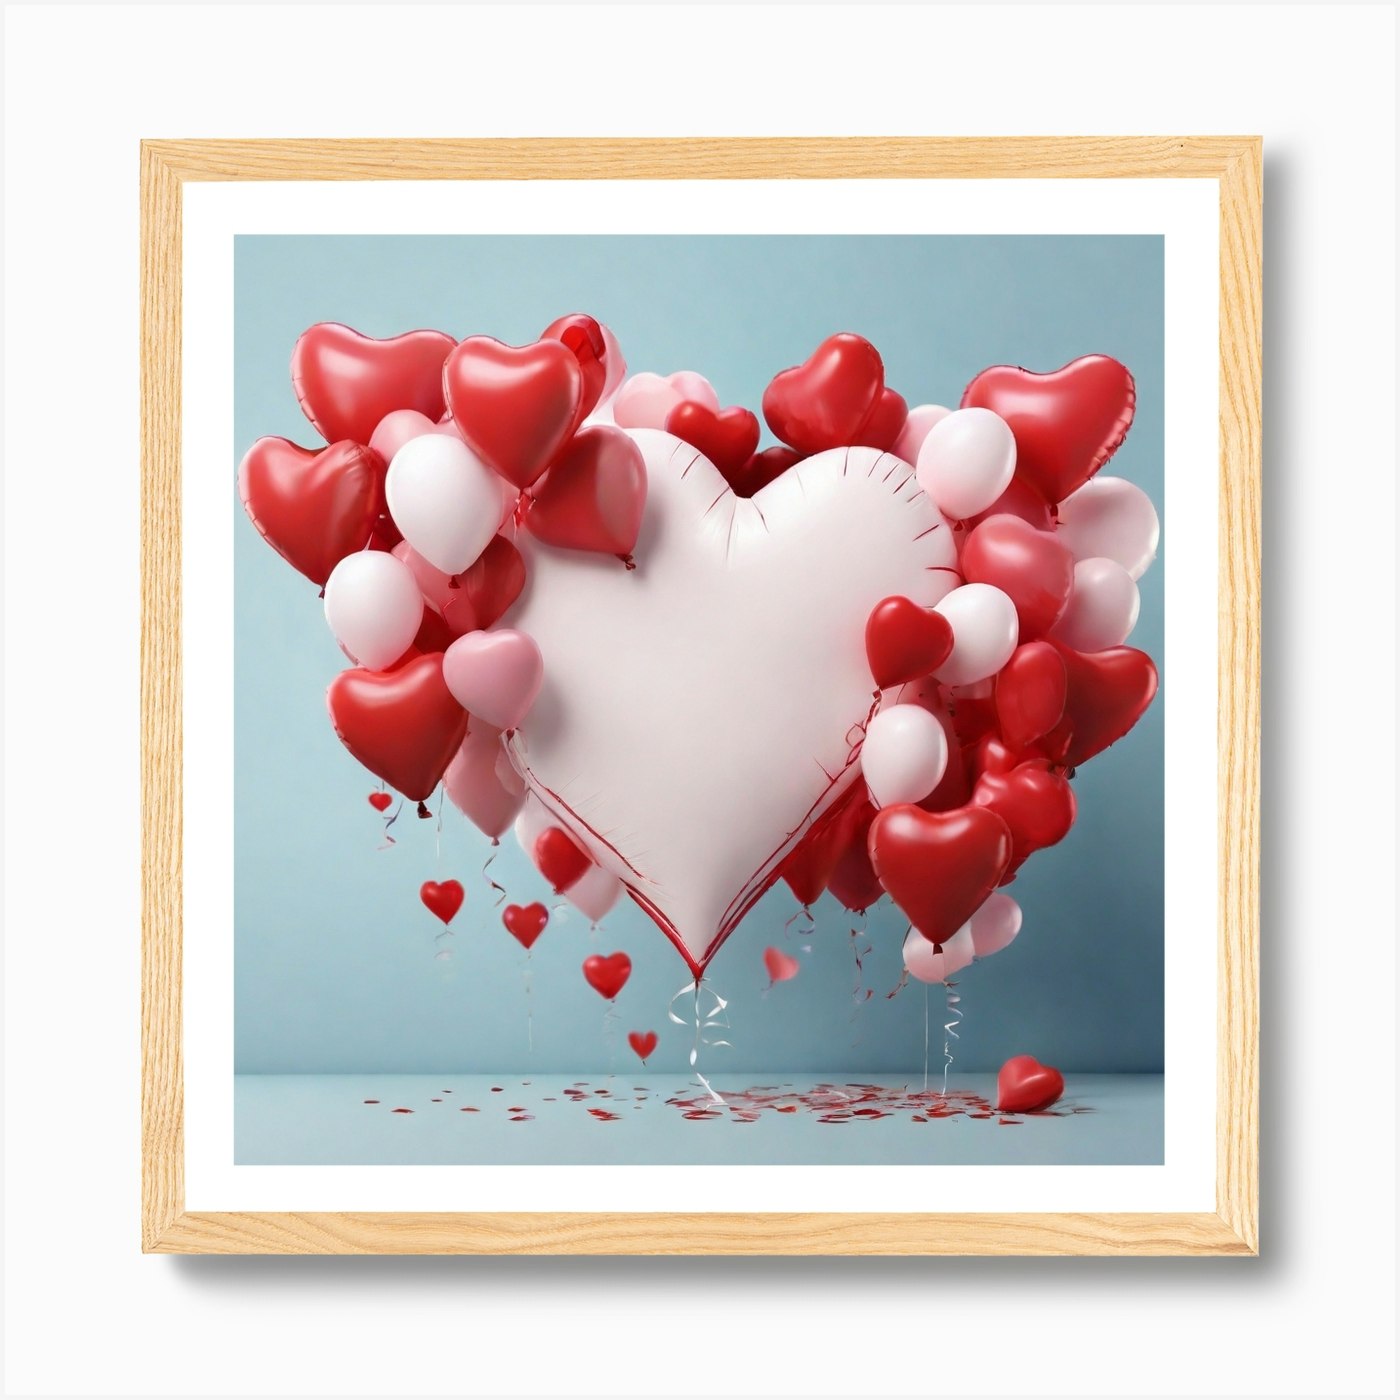 Four Red Heart Shaped Balloons Up In Air Canvas Print / Canvas Art